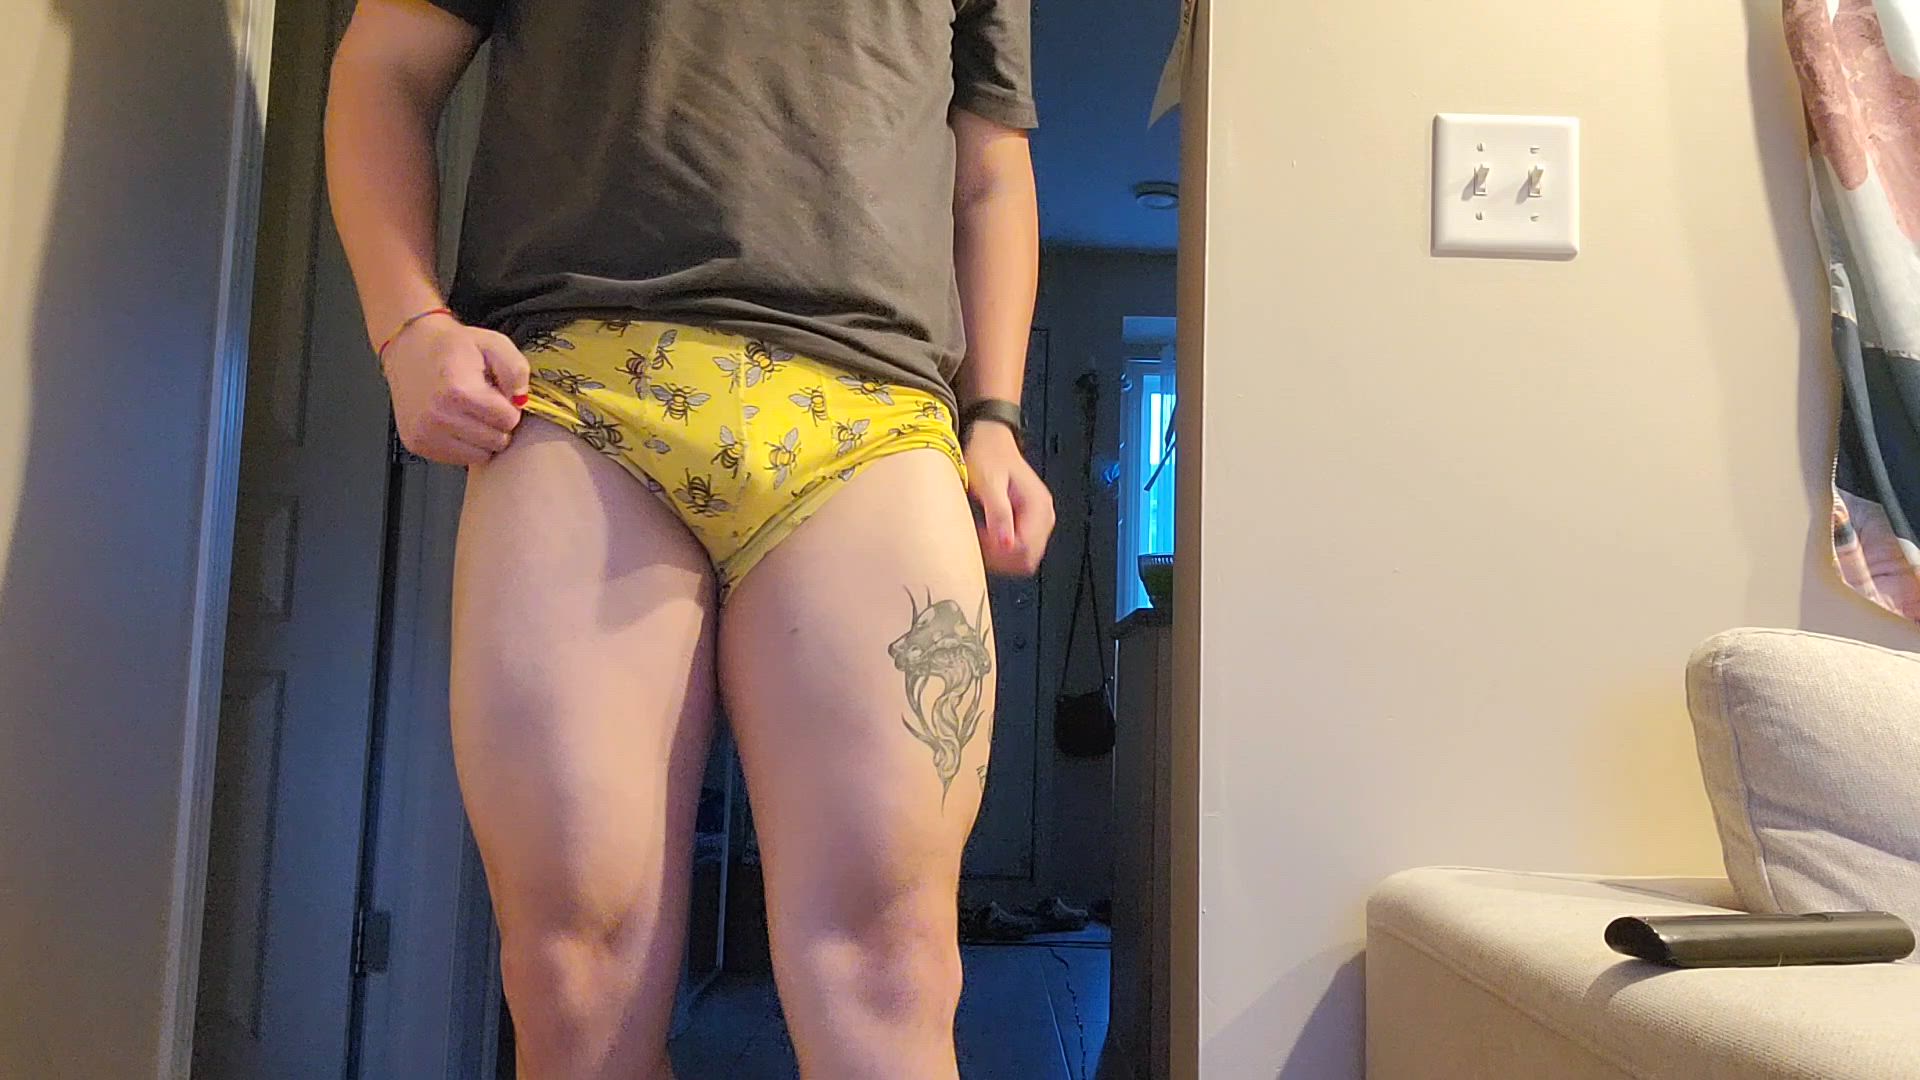 Thighs porn video with onlyfans model ddsinxx <strong>@ddsin</strong>